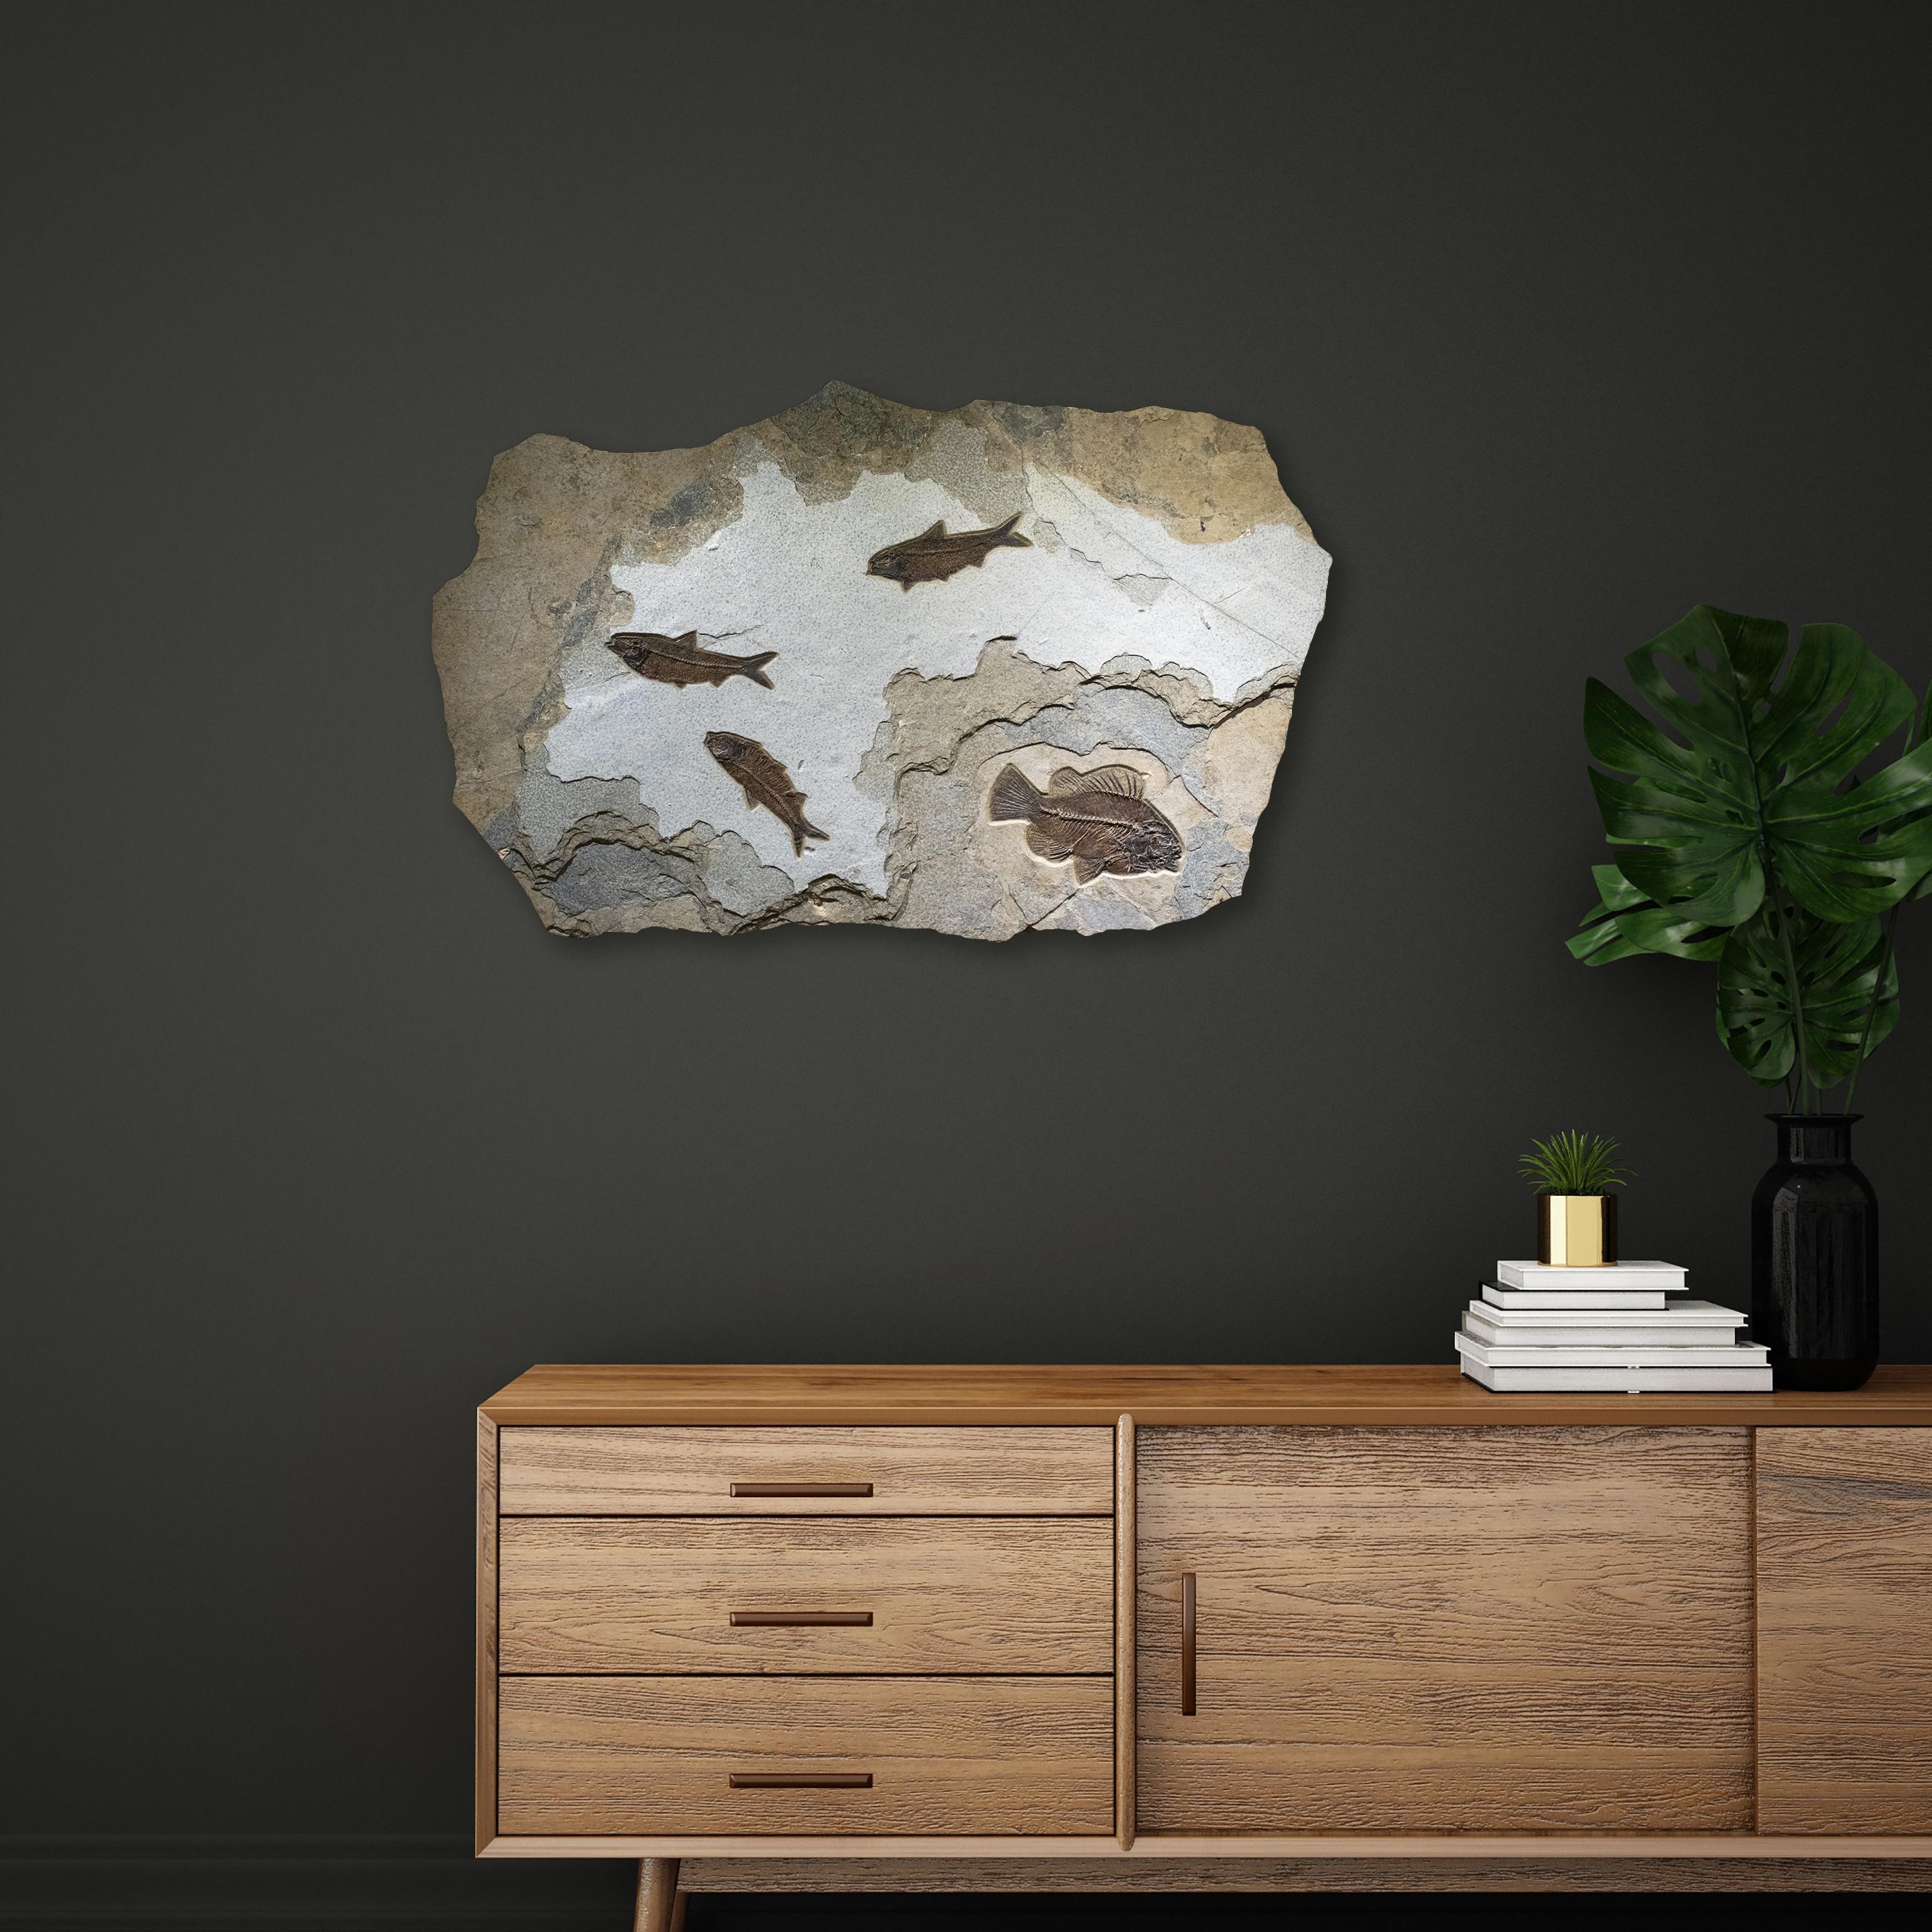 Featured here is an exquisite piece of natural history which makes an incredible statement; it works beautifully with design styles ranging from traditional to modern. This elegant irregular fossil mural features a Cockerellites liops (formerly